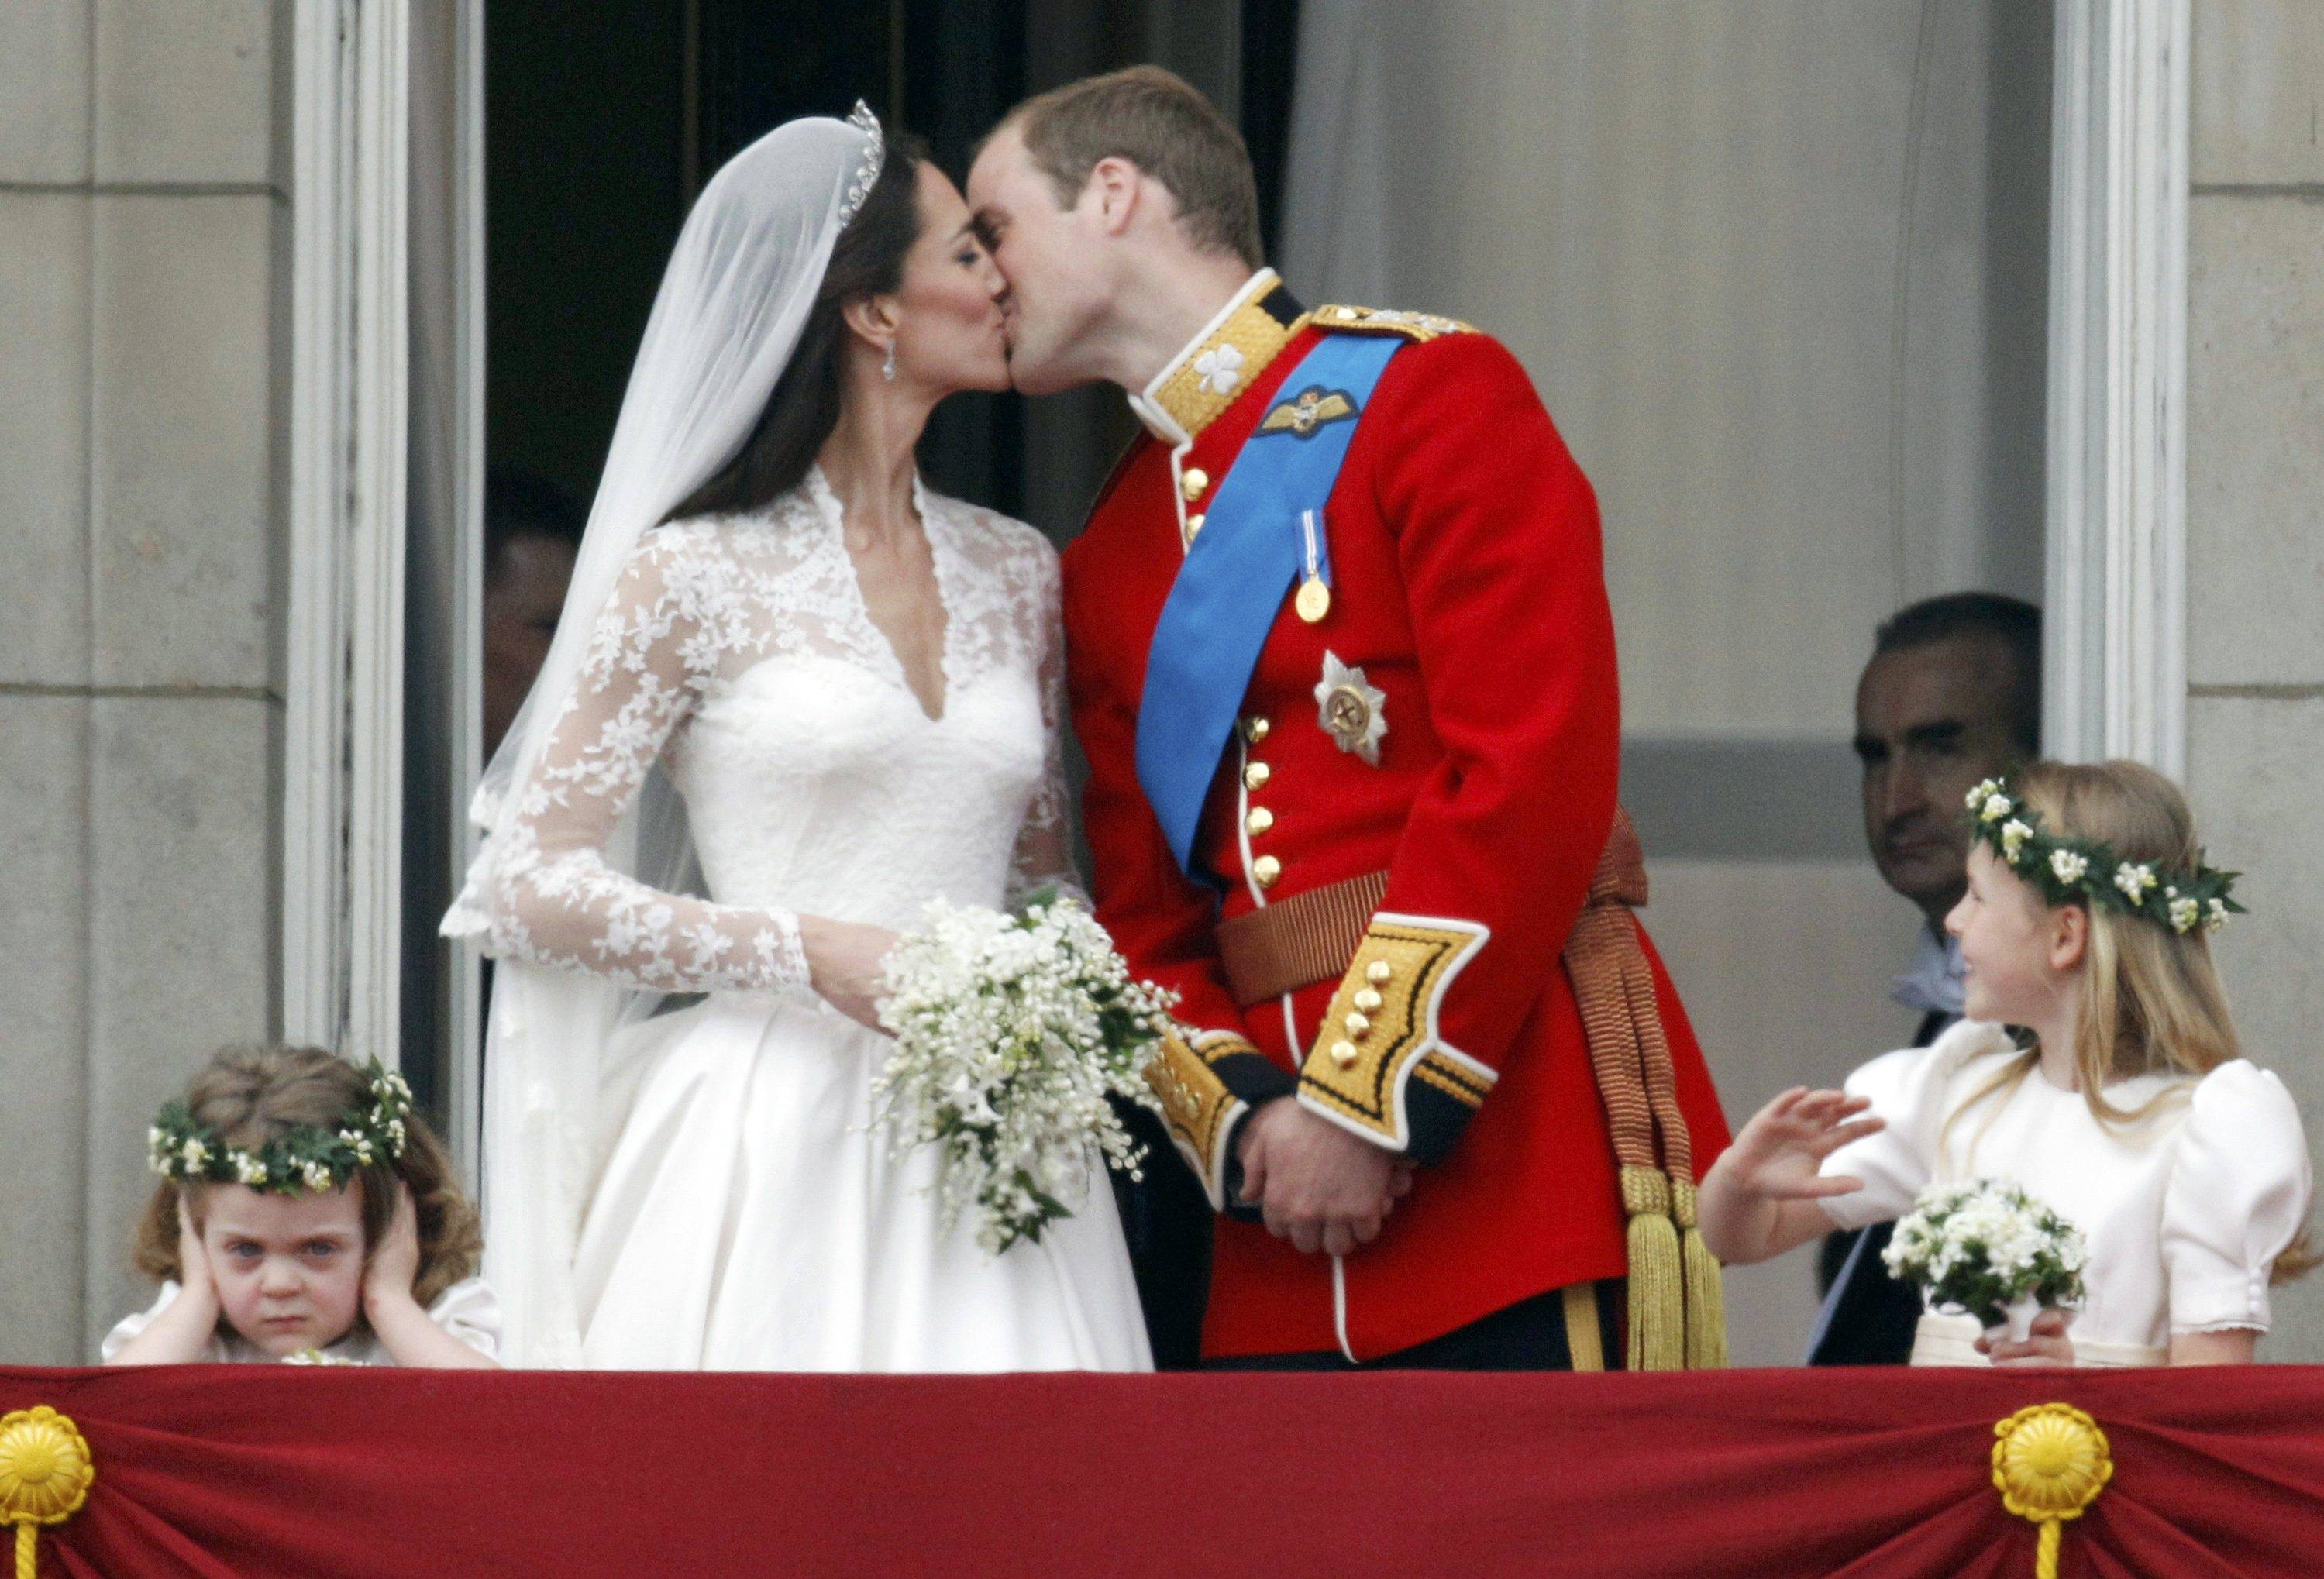 The magical moment said the entire world has been waiting on for most of this year finally occurrs as Britain's Prince William and Catherine Middleton, Duchess of Cambridge, kissed twice on the balcony of Buckingham Palace in front of family and ecstatic crowds welcoming the newest royal couple in what was described as the most fabulous ceremony for the world to see in a very long time, make the 3-year-old Miss Grace van Cutsem protects her ears to avoid roar while the other bridesmaid Margarita Armstrong-Jones looks in, Central London, April 29, 2011.